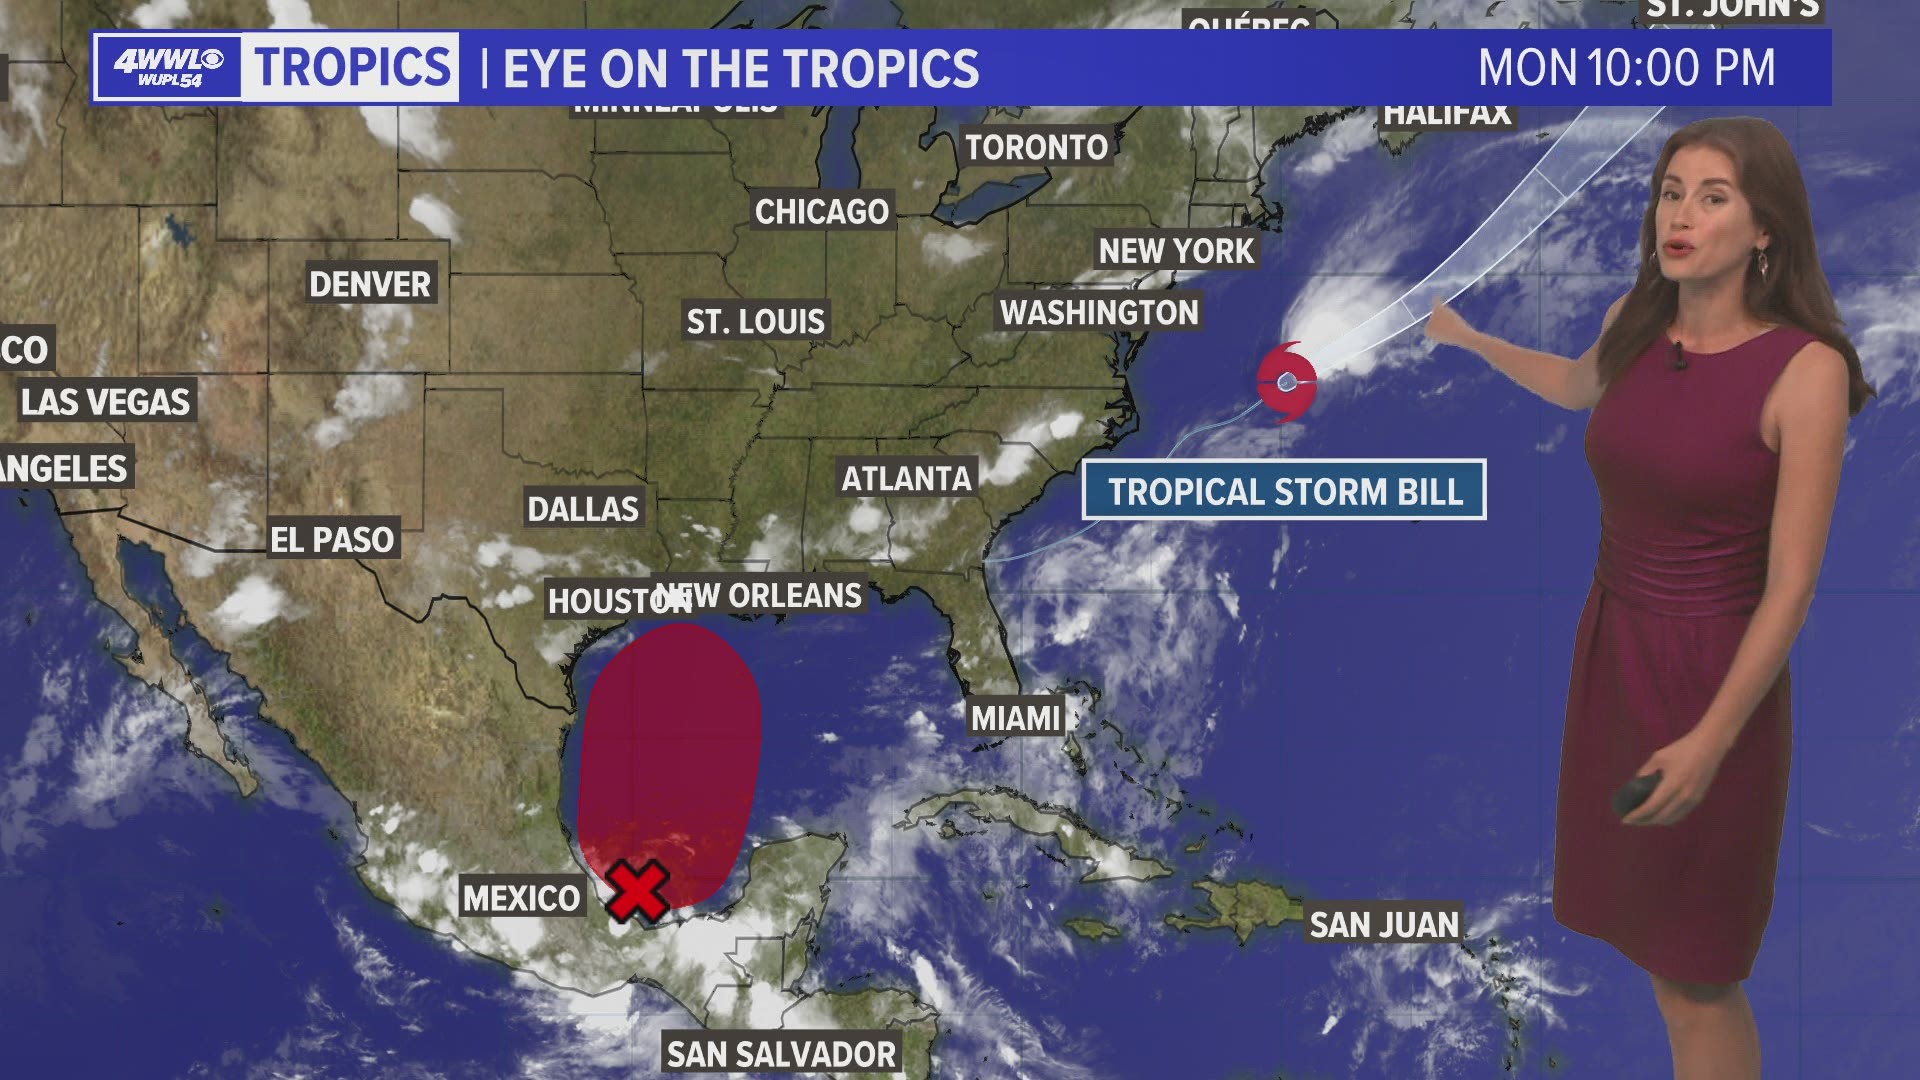 There's a good chance a tropical depression could form in the Gulf of Mexico this week.